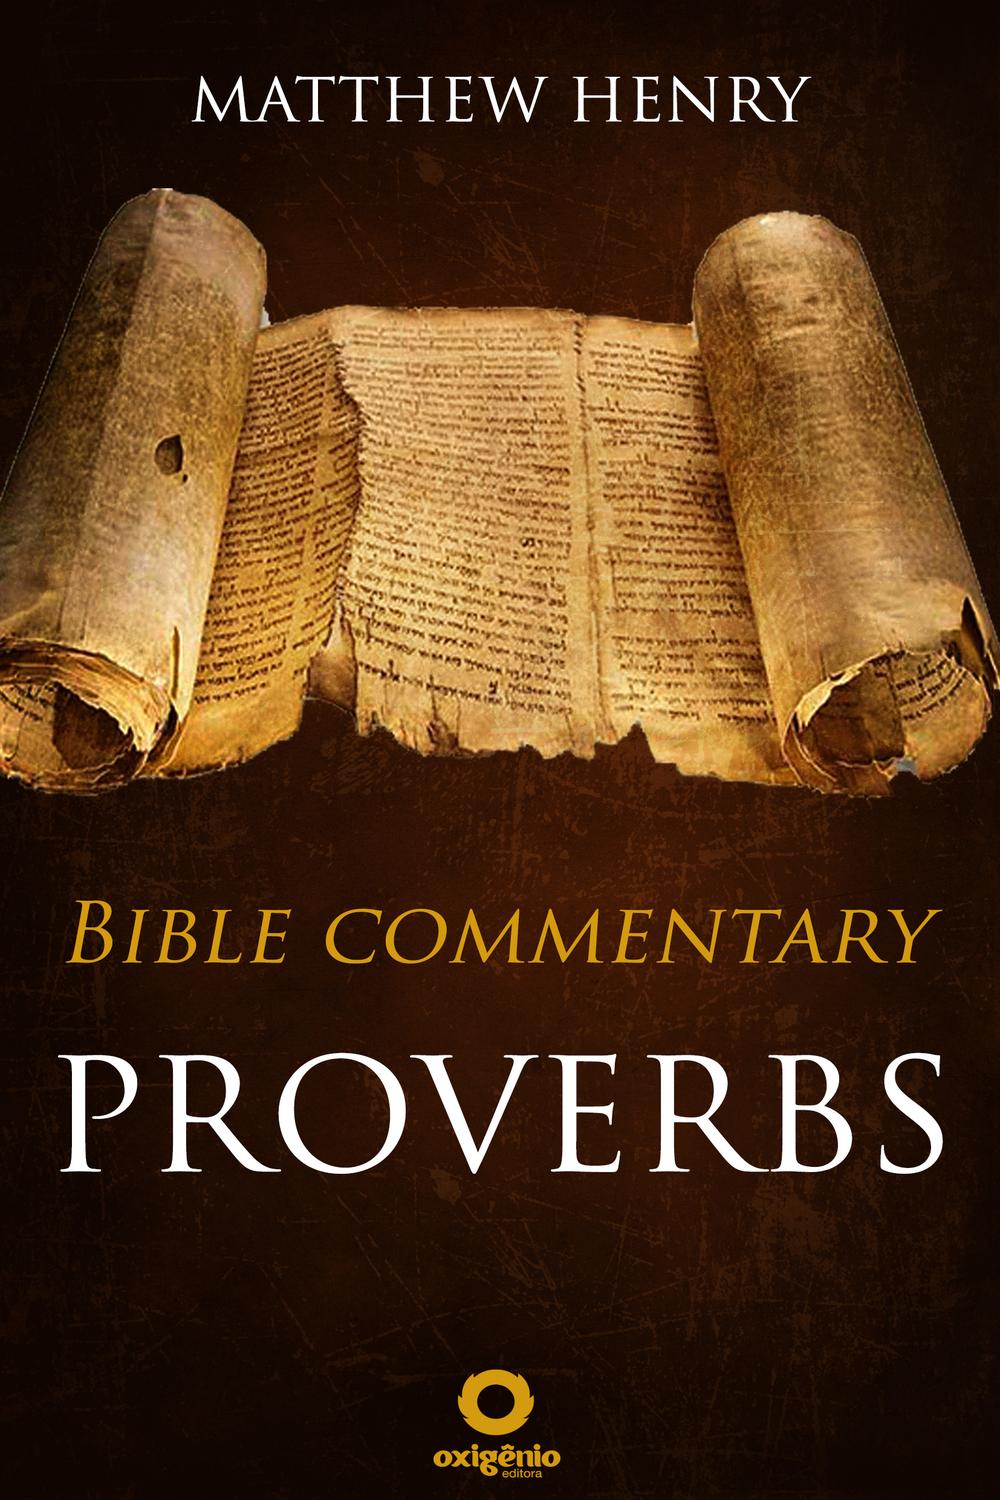 Proverbs - Complete Bible Commentary Verse by Verse - Matthew Henry